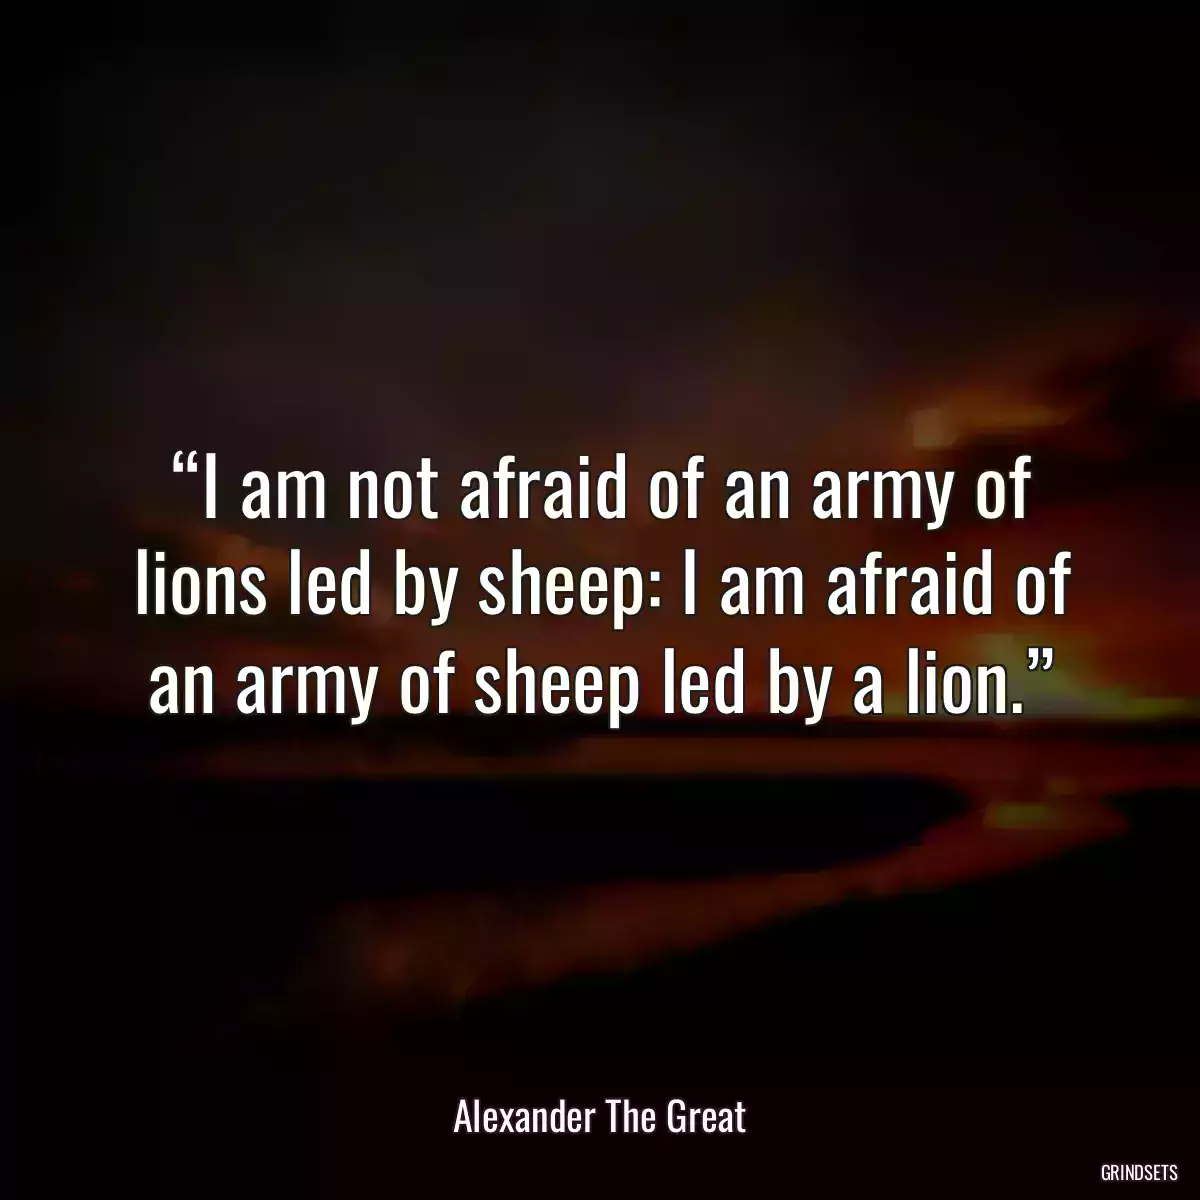 “I am not afraid of an army of lions led by sheep: I am afraid of an army of sheep led by a lion.”